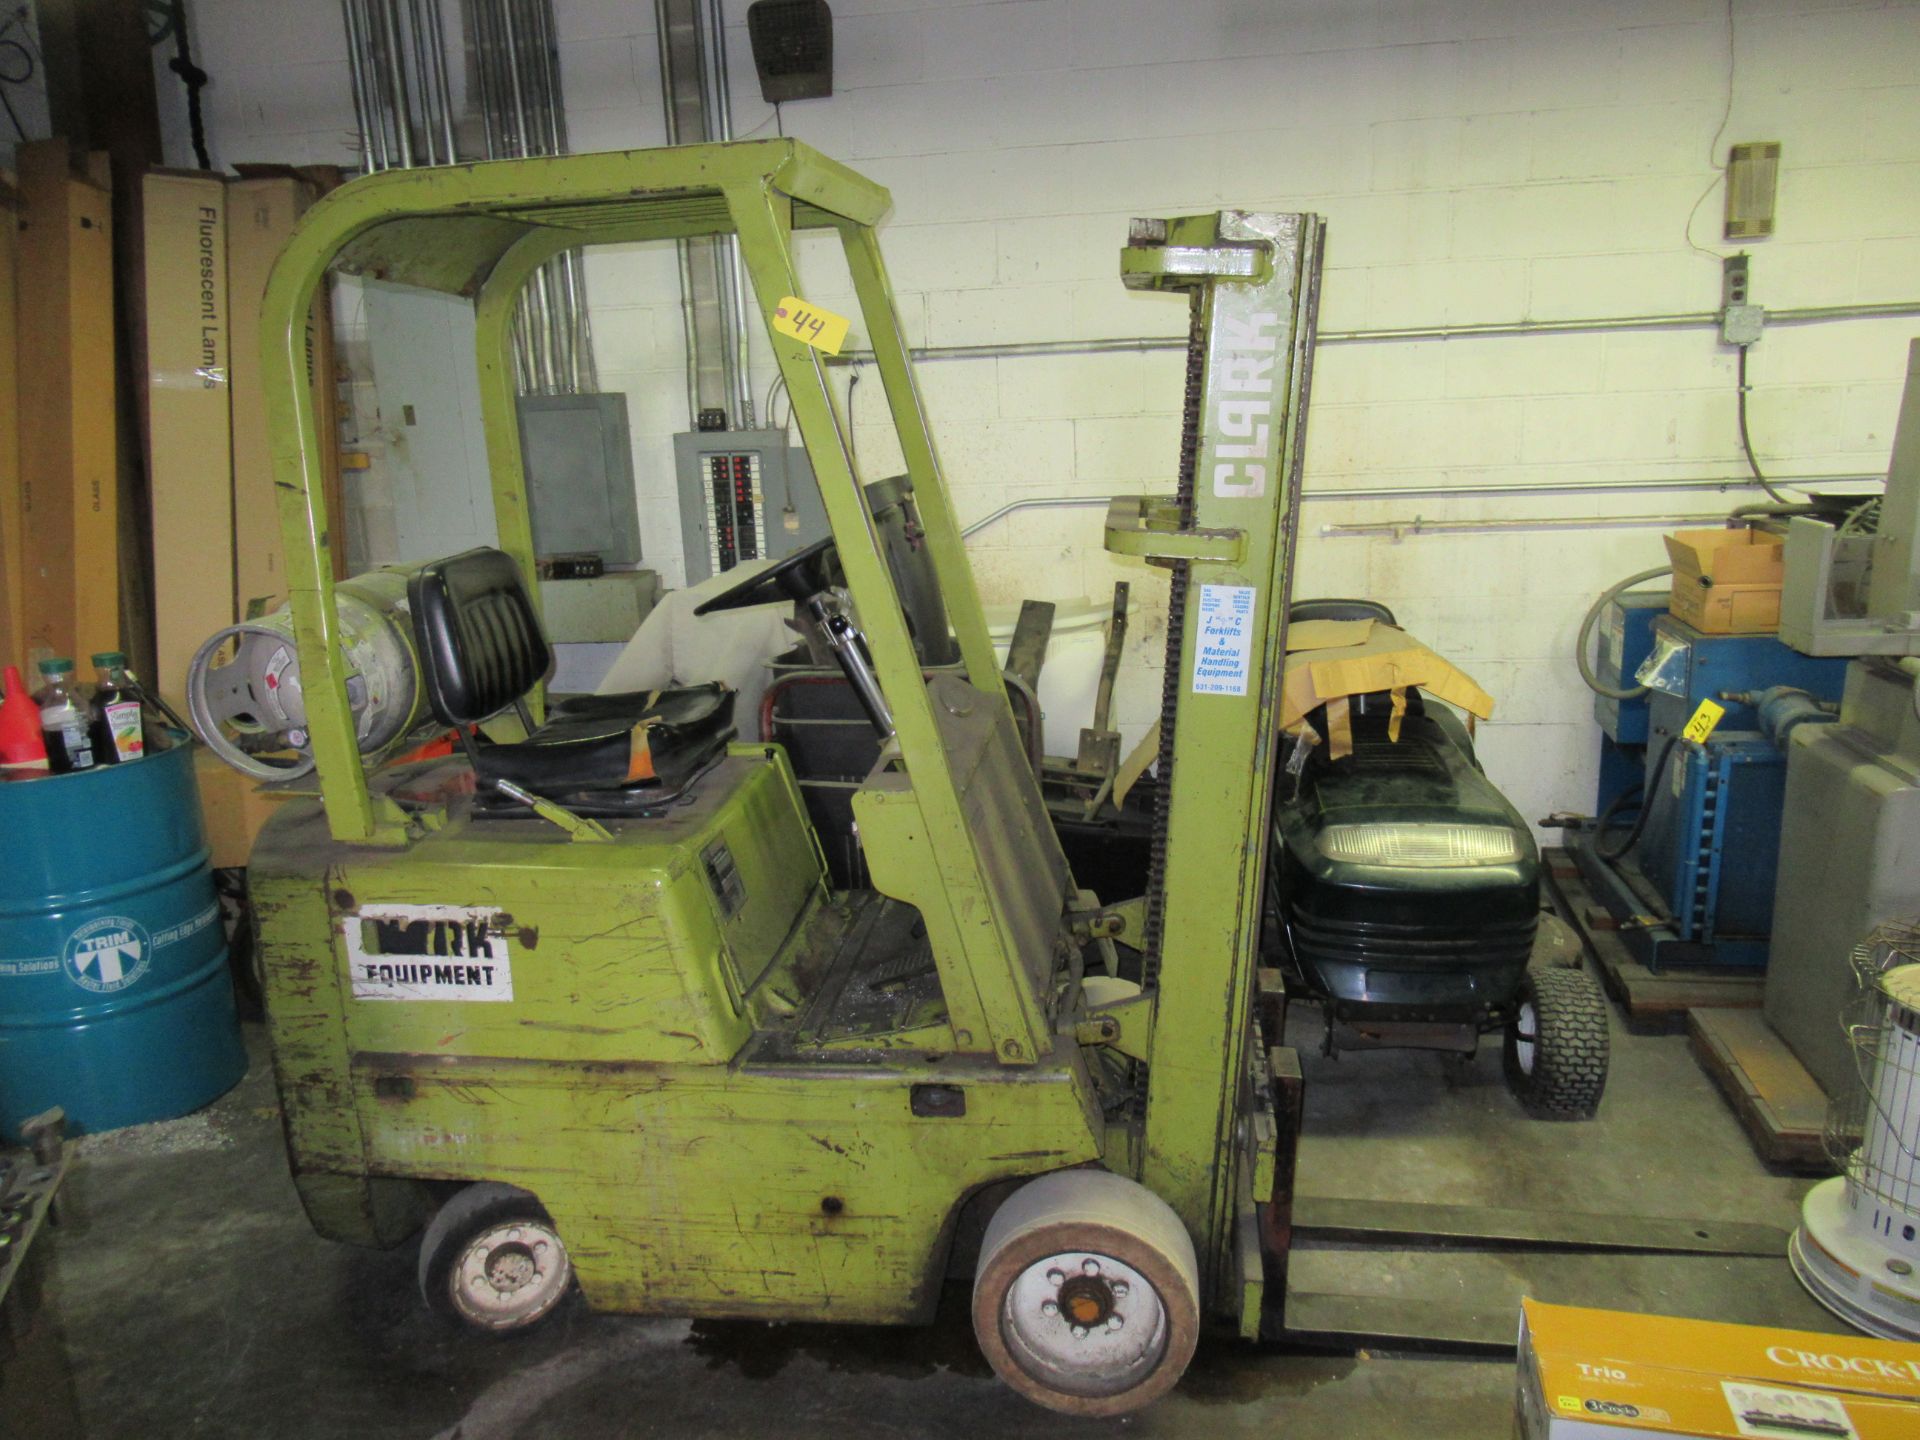 CLARK MDL. 0500-830 PROPANE POWERED 3000# CAPACITY FORKLIFT TRUCK, WITH 130" REACH, 3-STAGE MAST, - Image 5 of 11